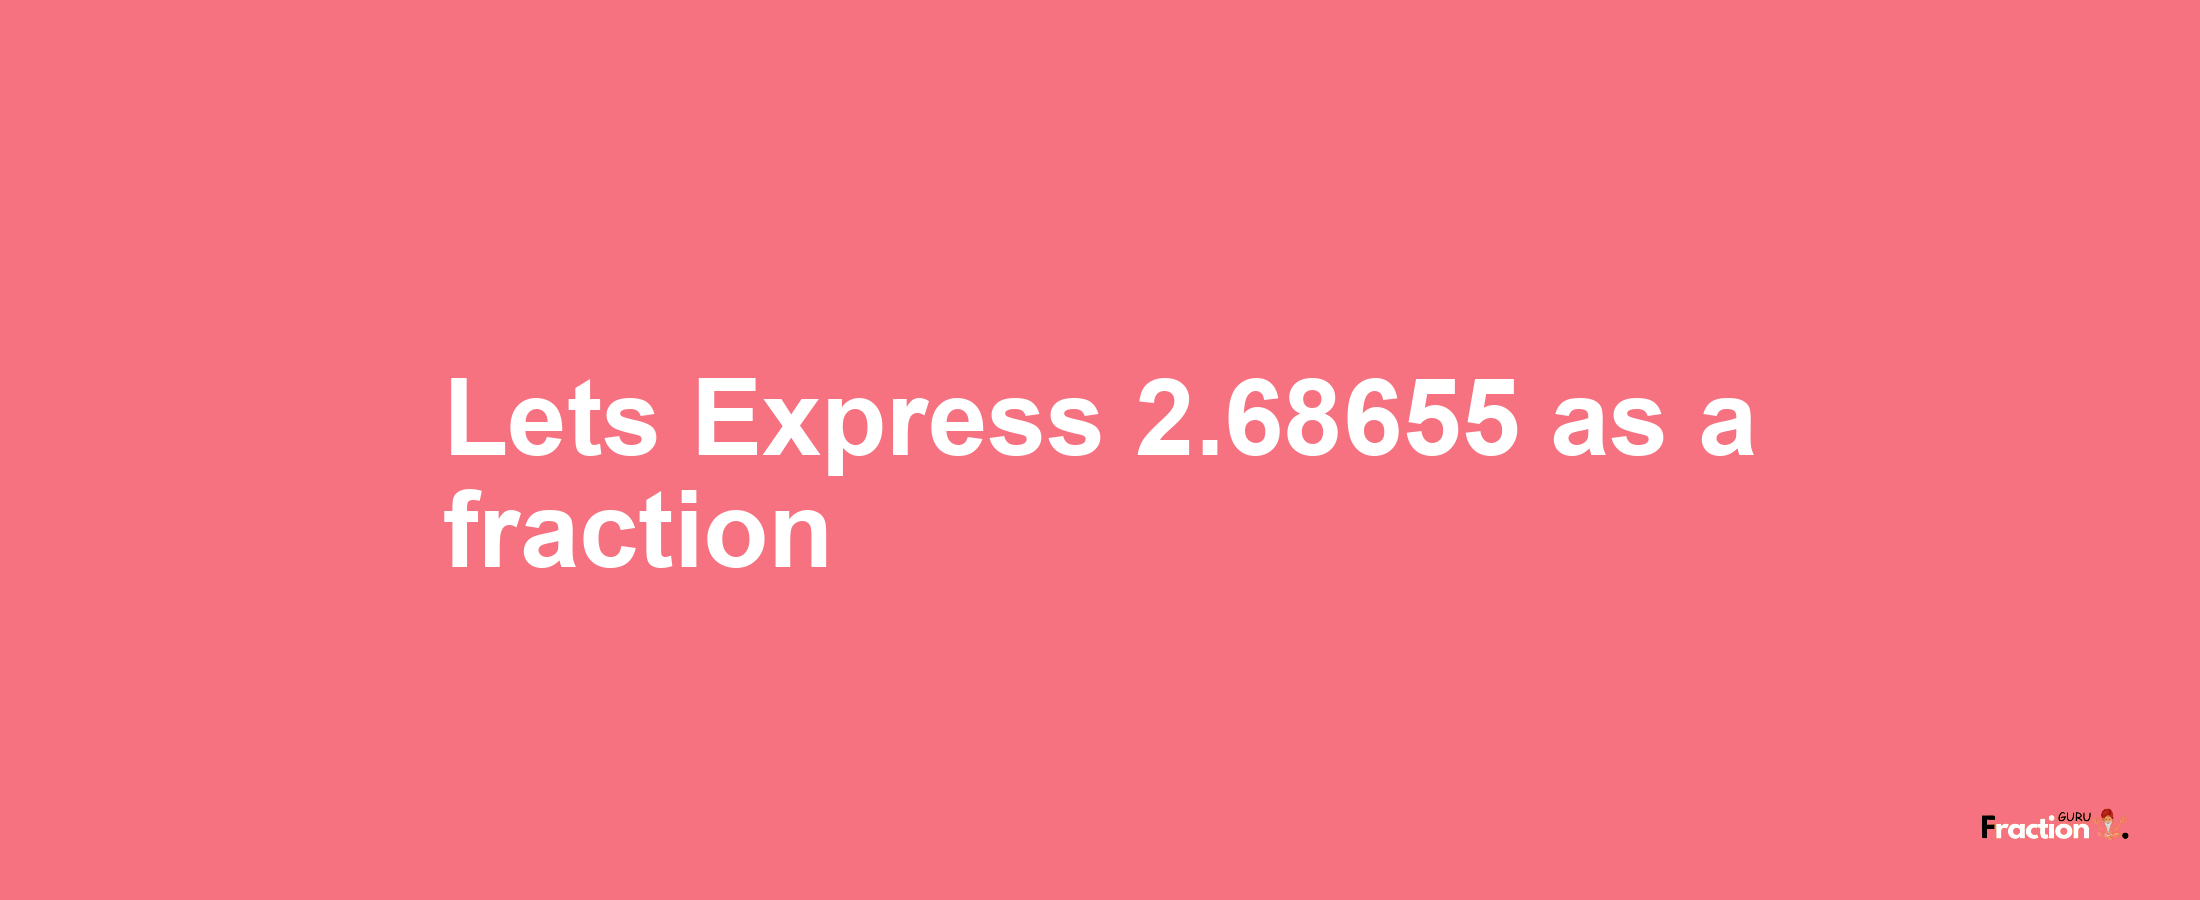 Lets Express 2.68655 as afraction